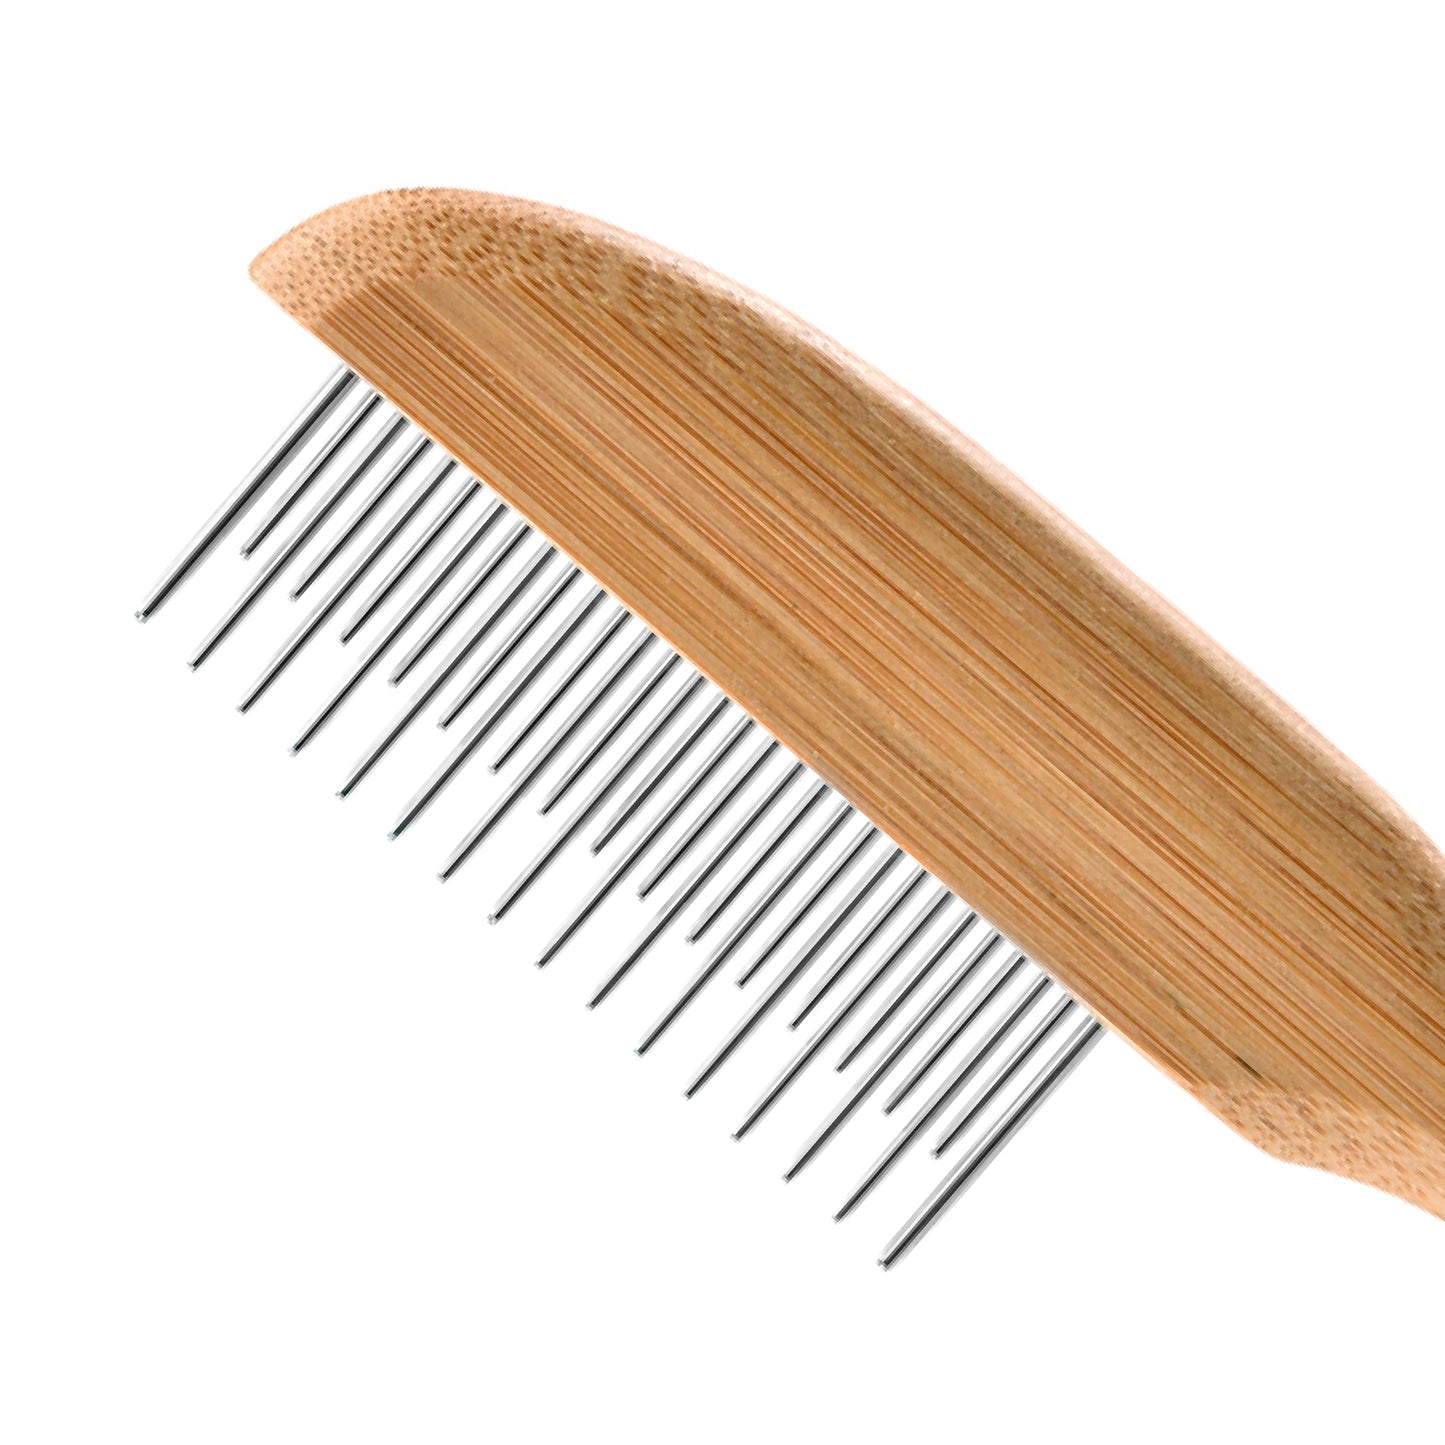 Bamboo Swivel Comb NATURE COLLECTION